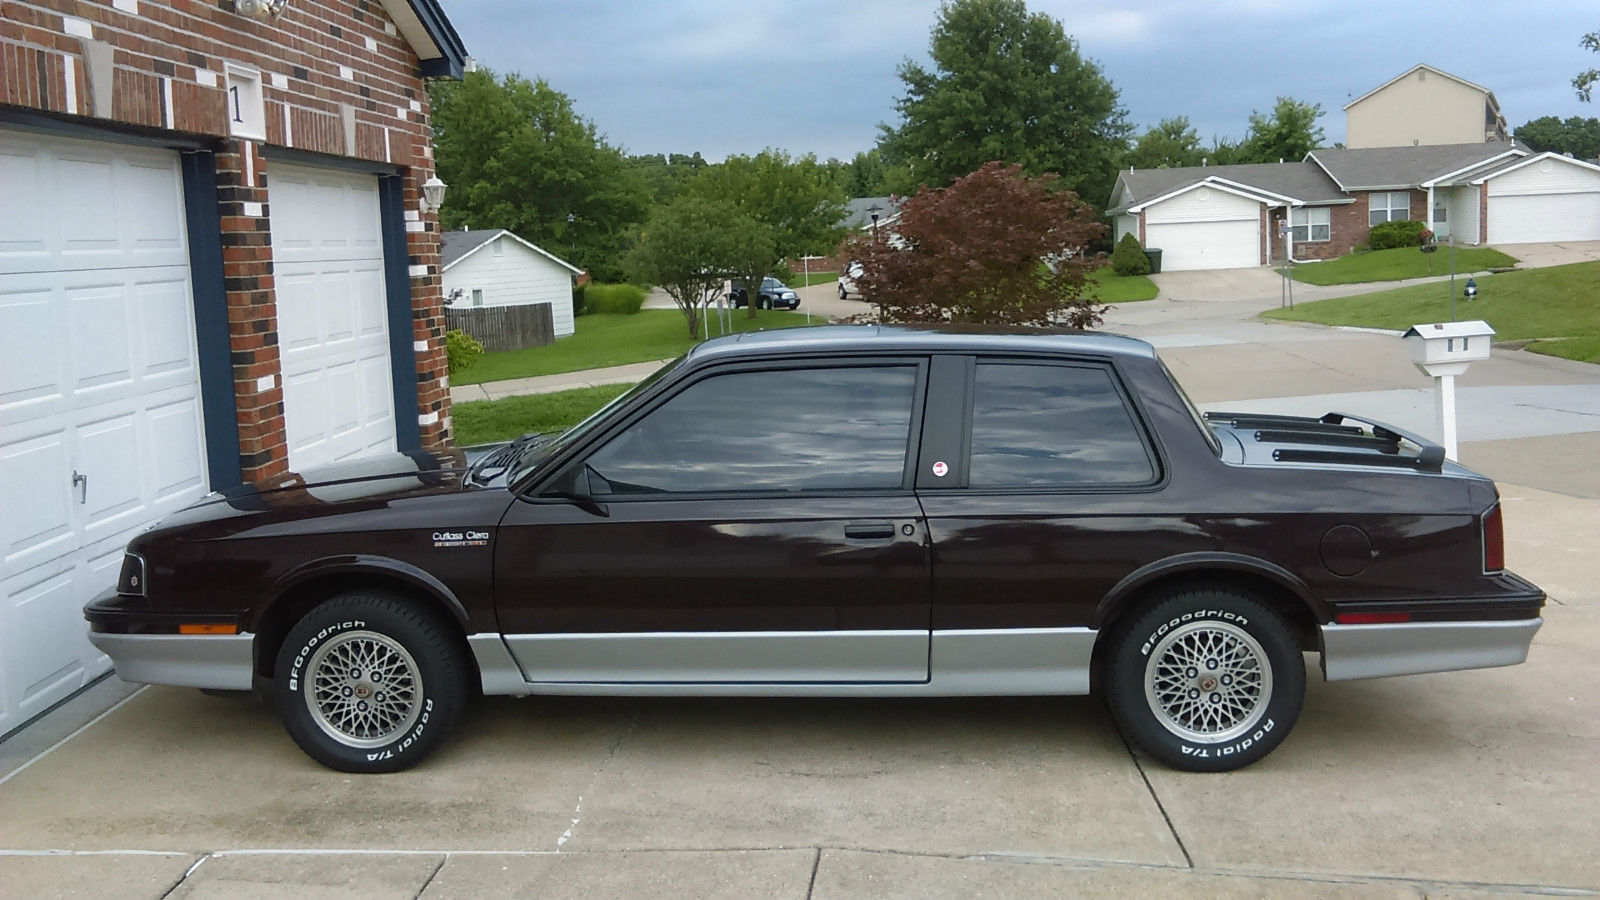 Could This 1986 Oldsmobile Cutlass Ciera GT Be Made To Haul The Mail? We Think So.